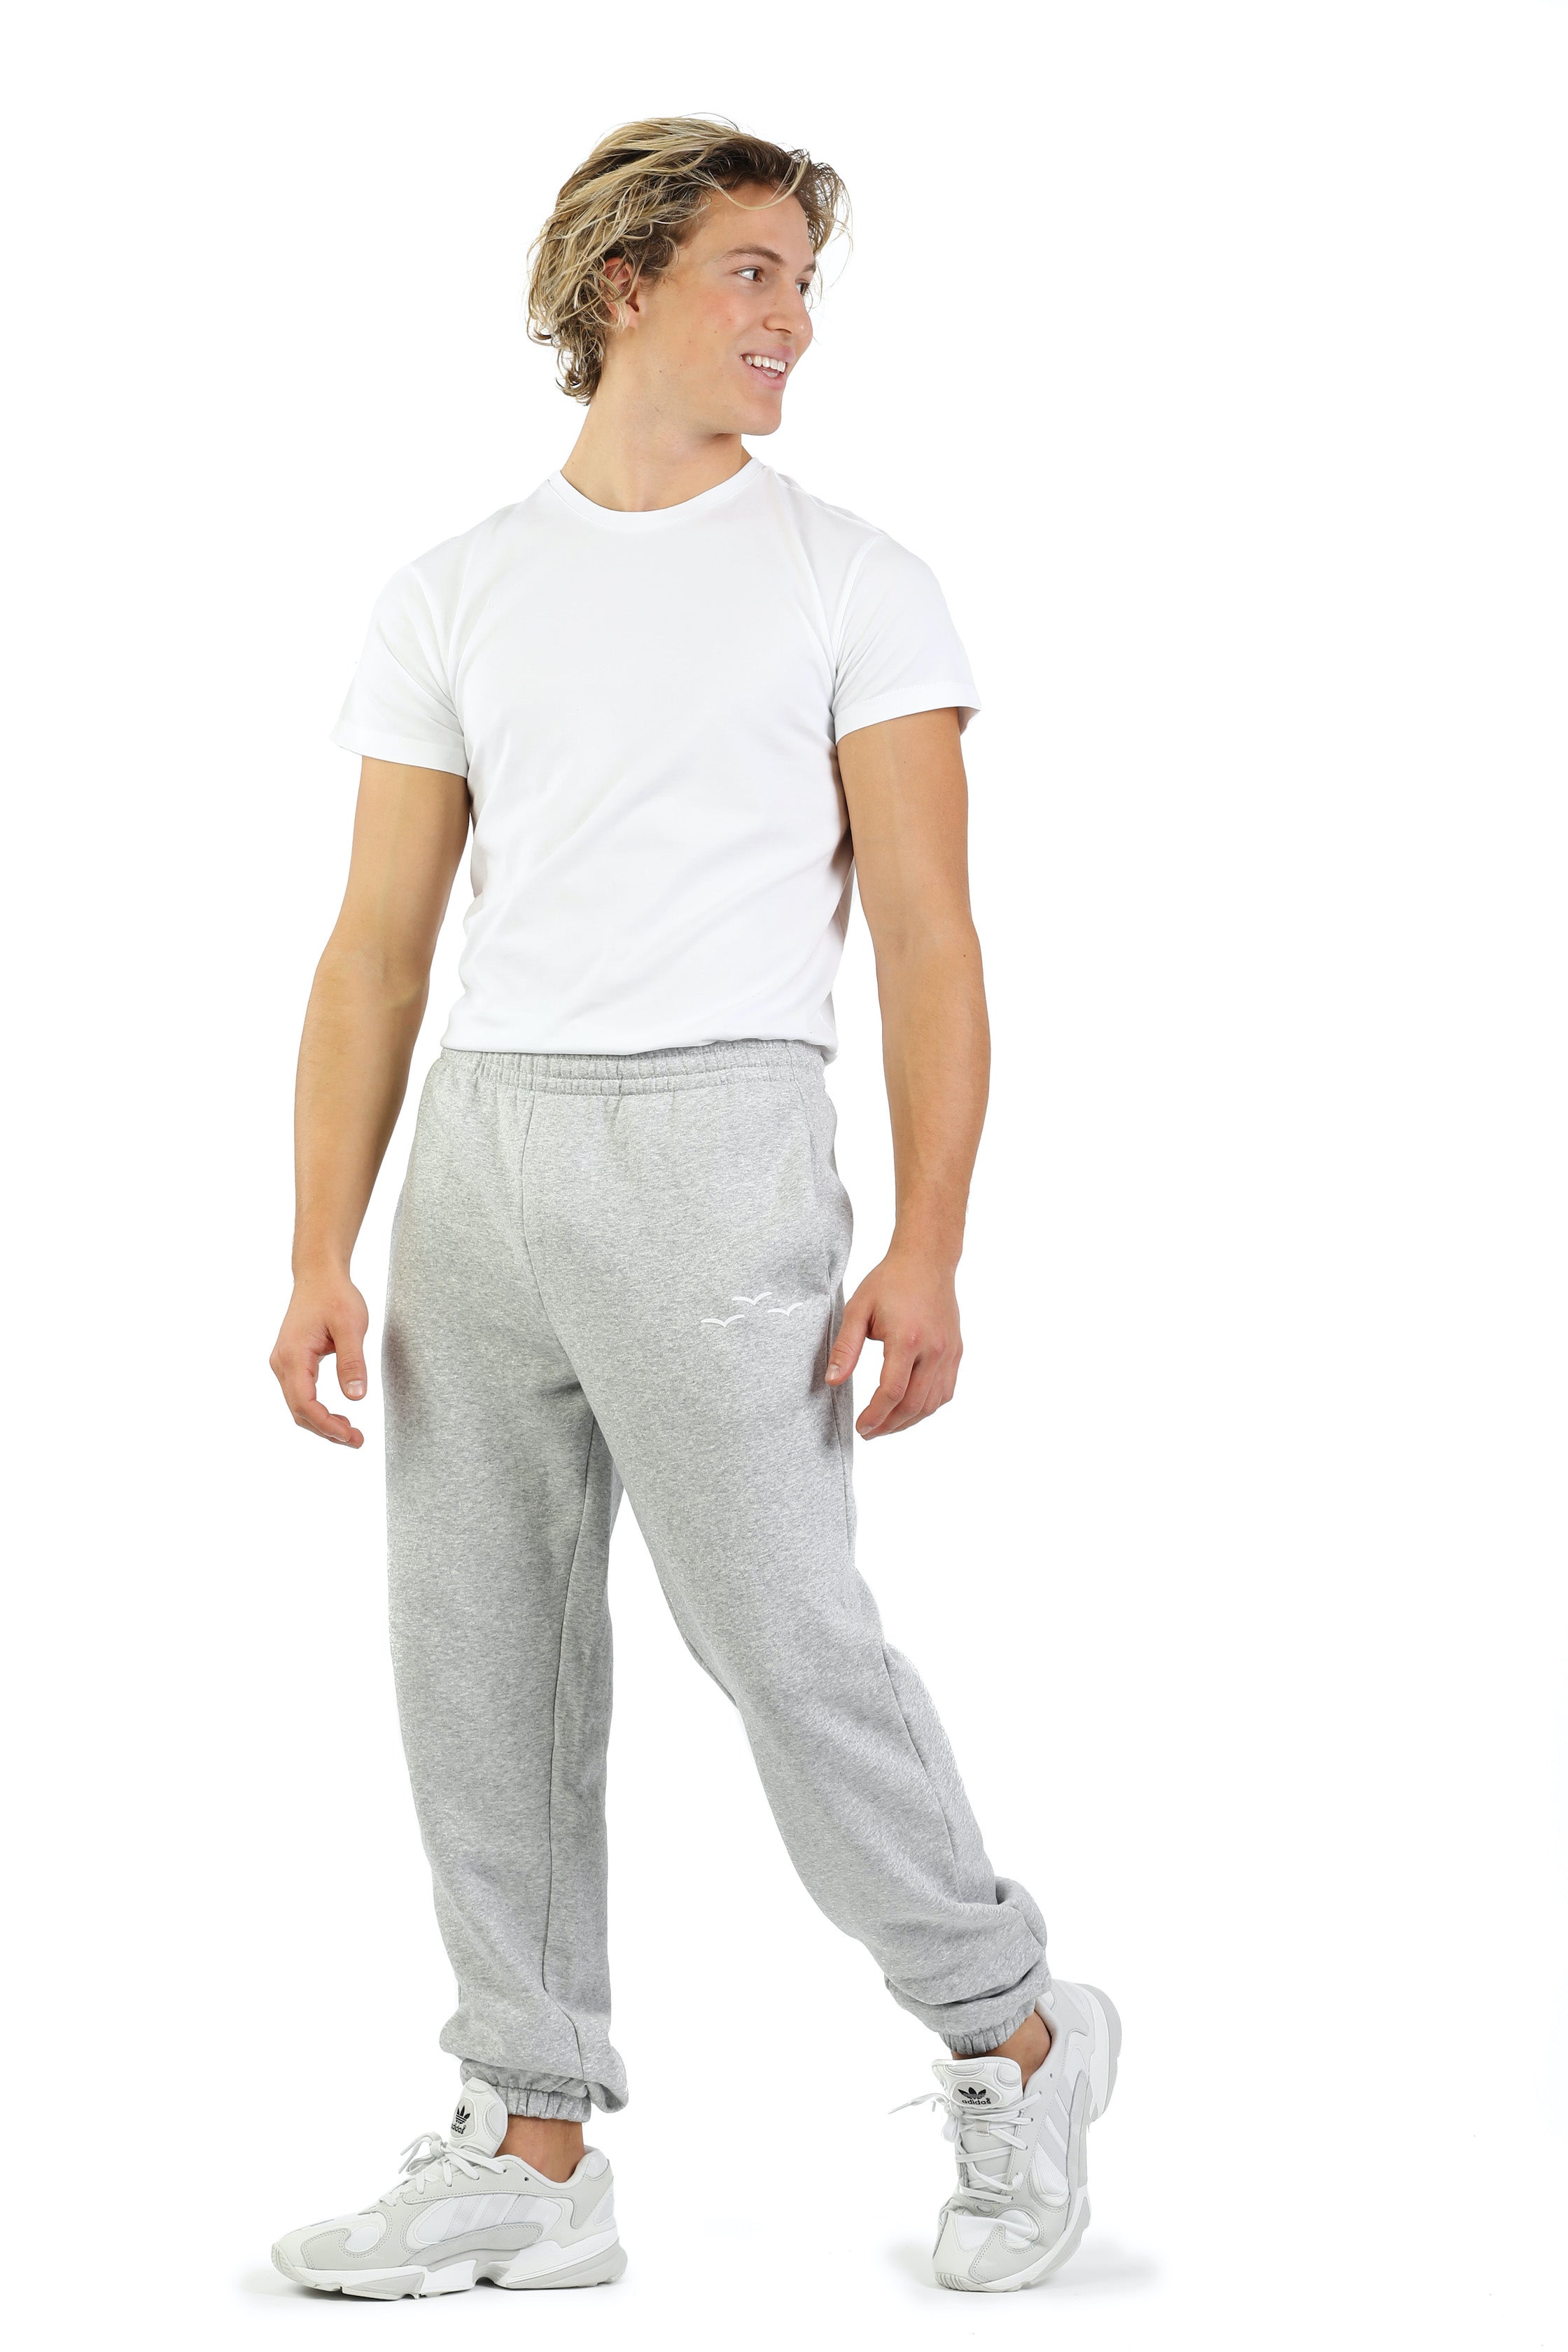 Wholesale 2x-Large Adult Sweatpants in Canada